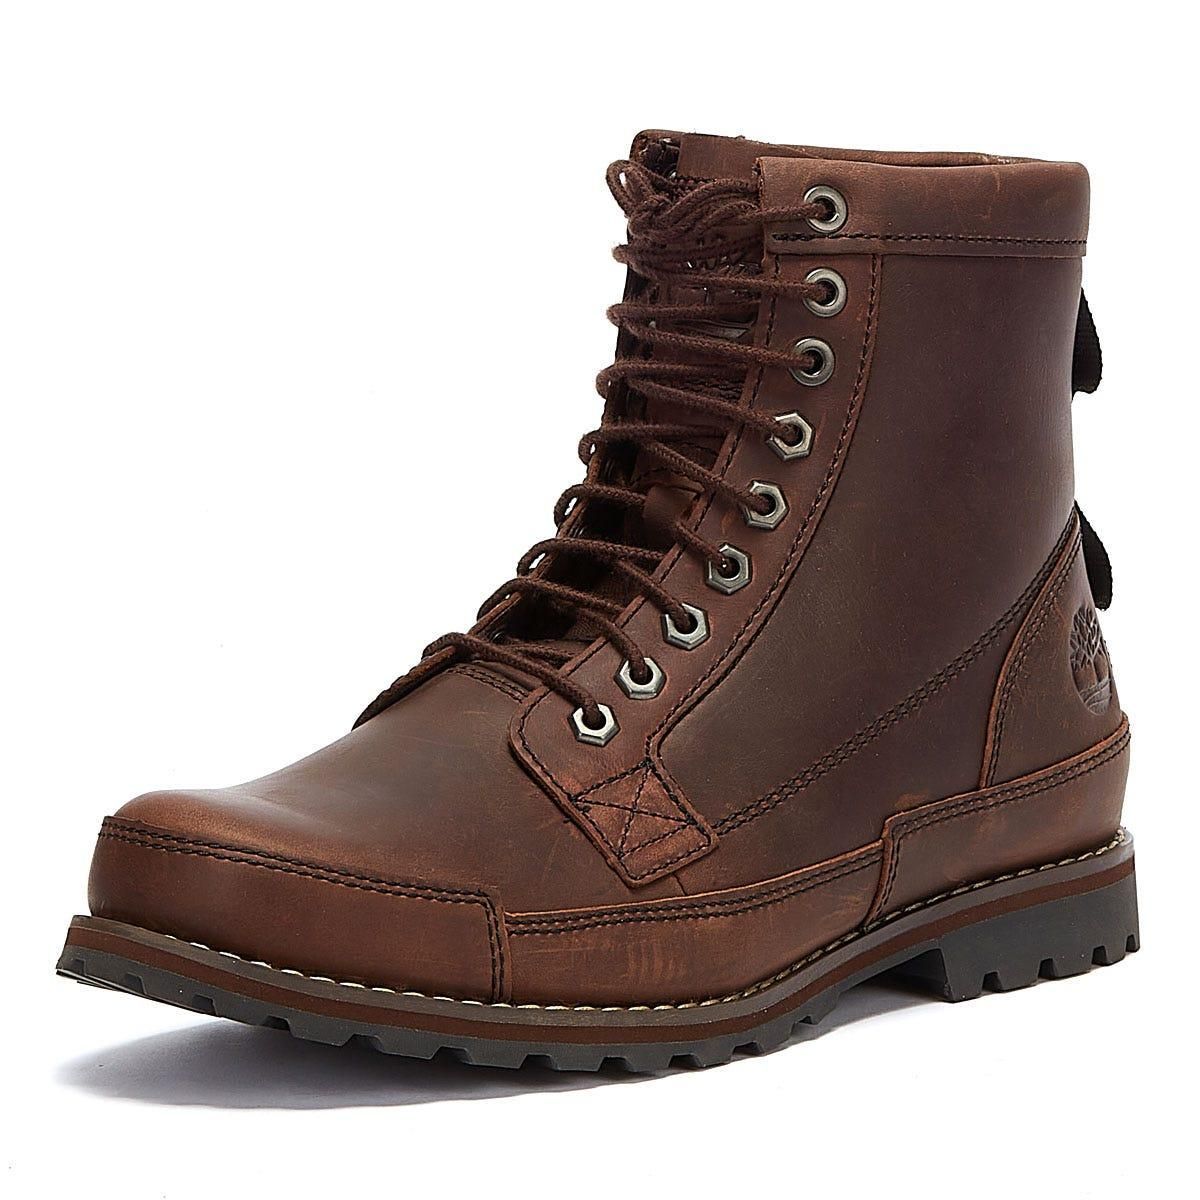 Earthkeepers 6" Lace-Up Boot